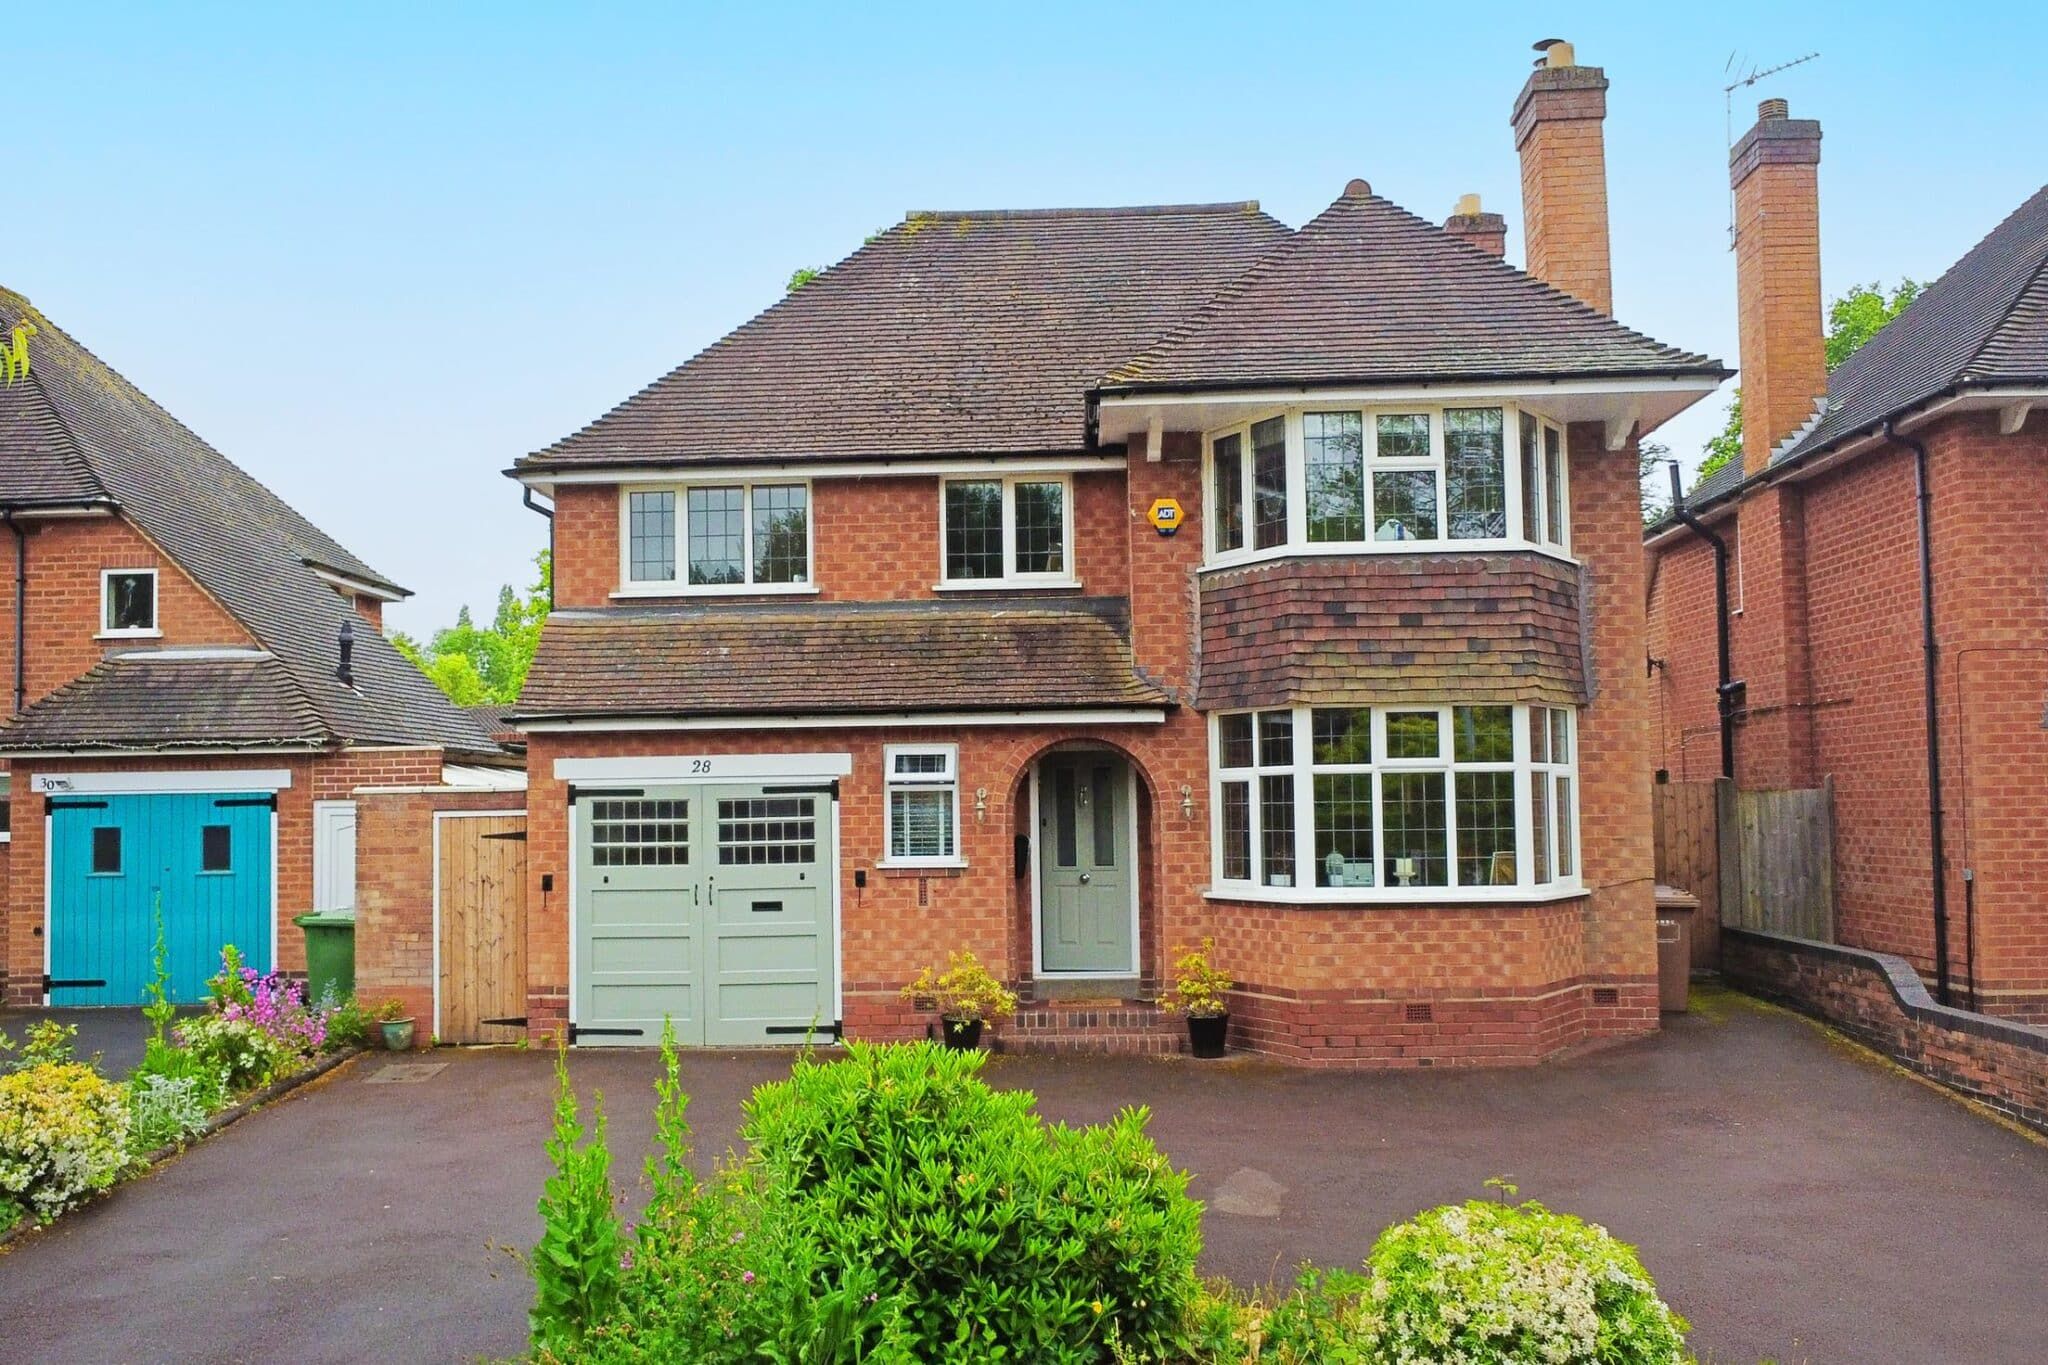 Witley Avenue, Solihull, Solihull, B91 3JD